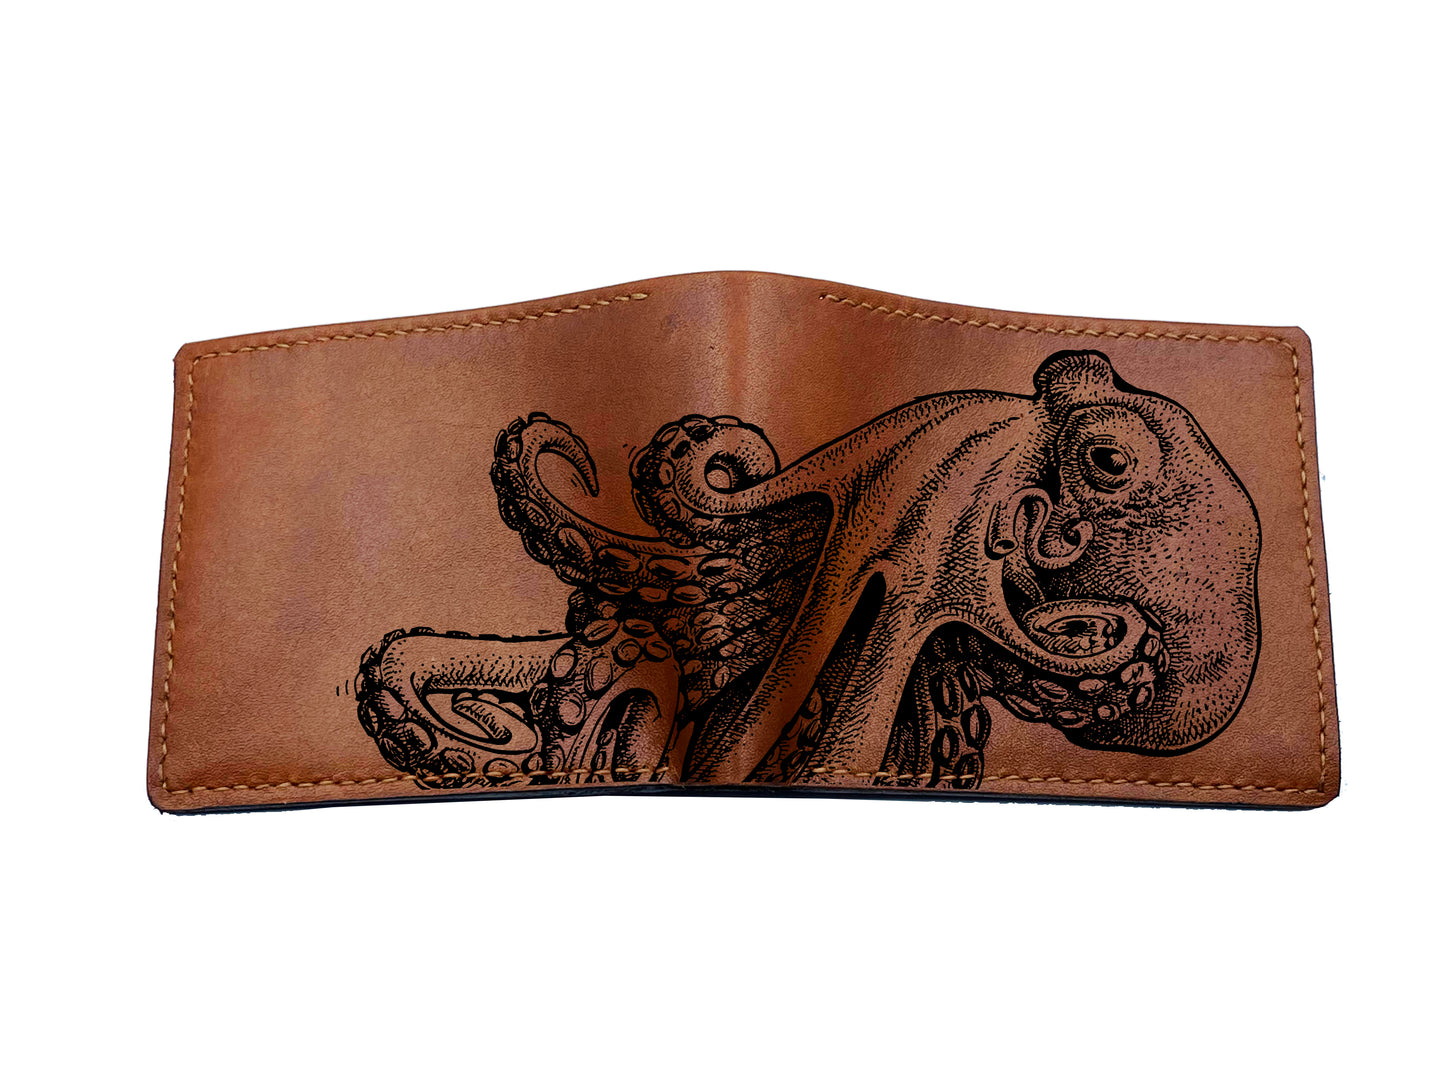 Personalized leather men's wallet, octopus pattern wallet, ocean sea summer gift for him, christmas gift idea for men, sea lover present